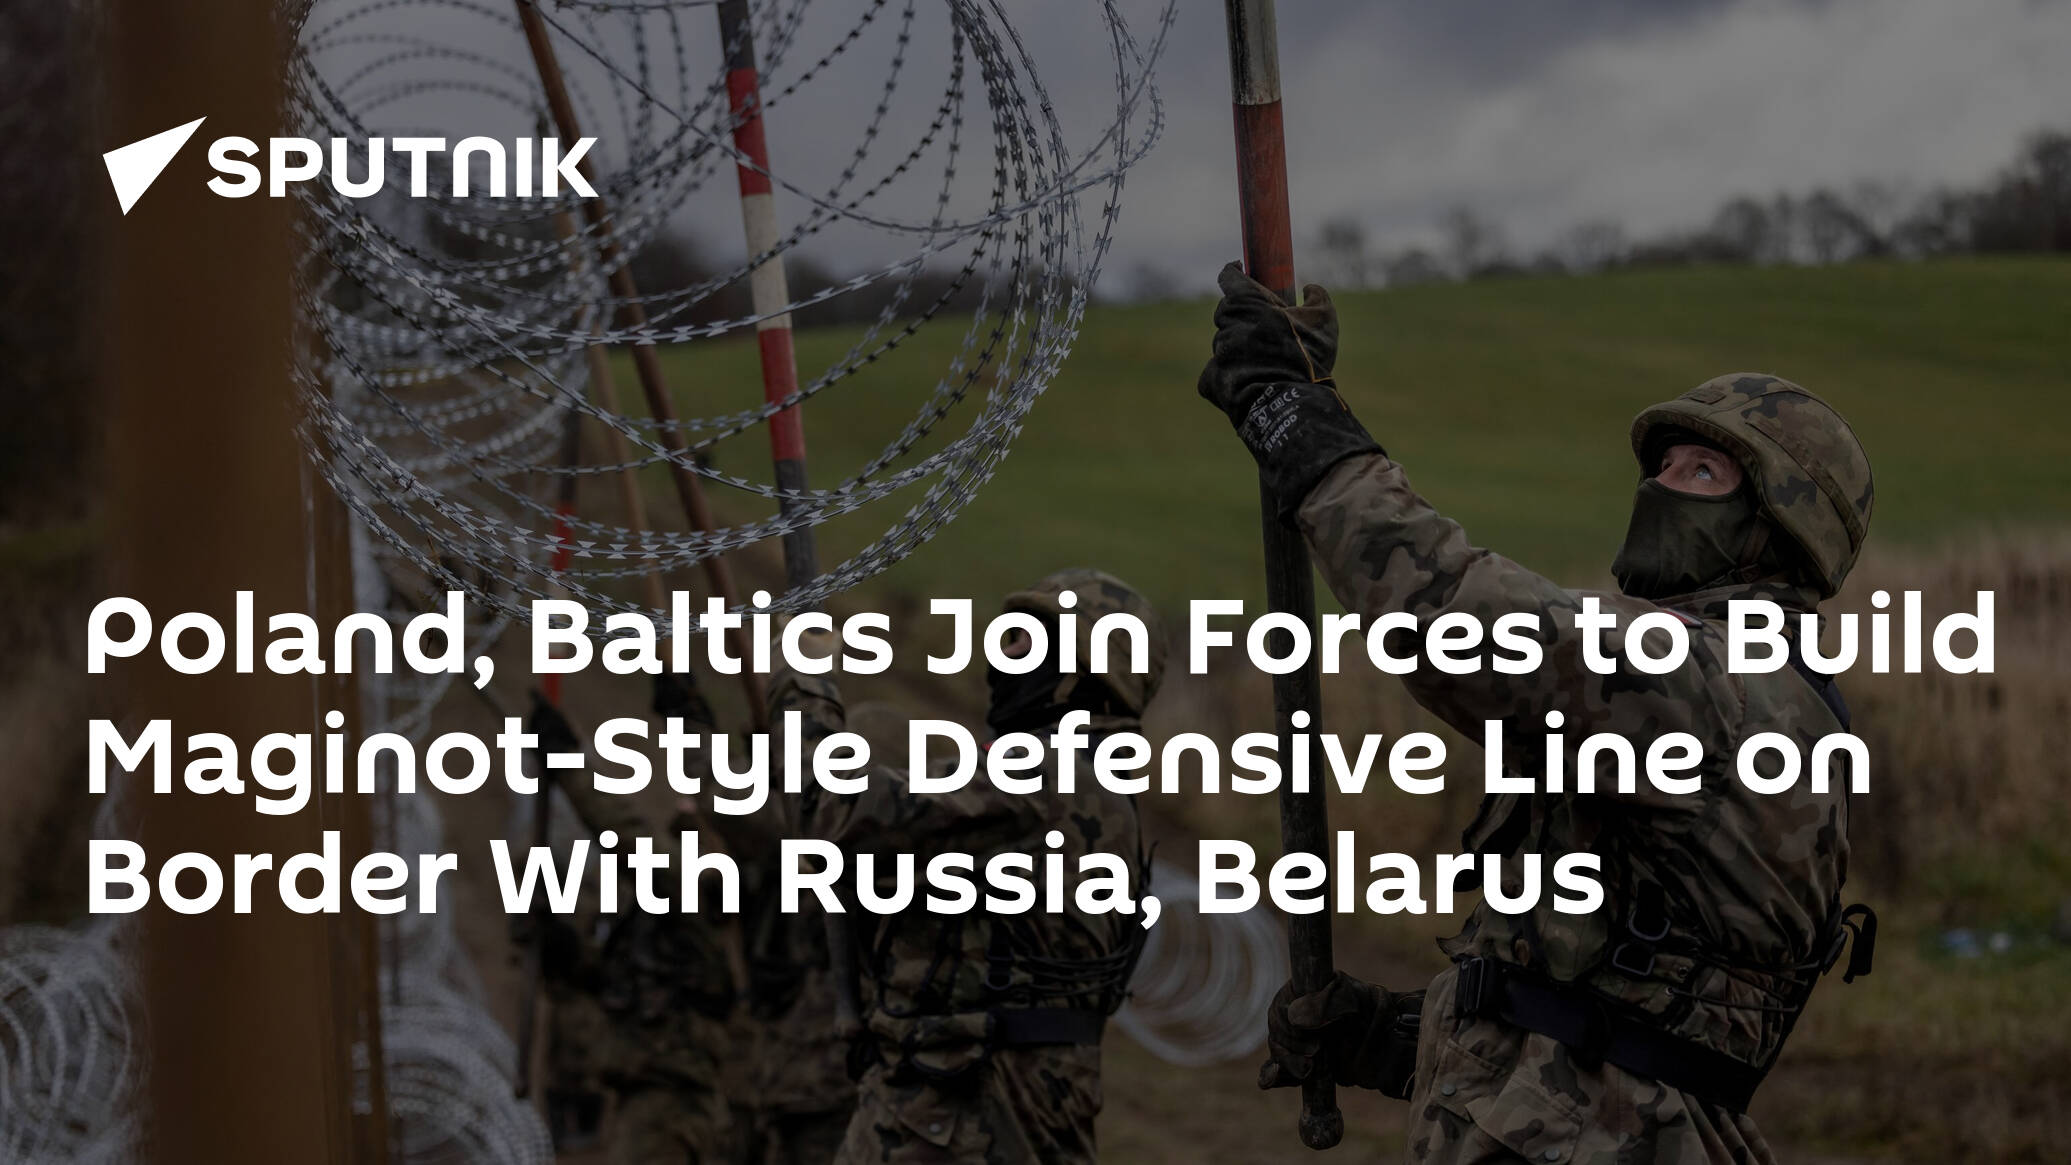 Poland, Baltics Join Forces to Build Maginot-Style Defensive Line on Border With Russia, Belarus